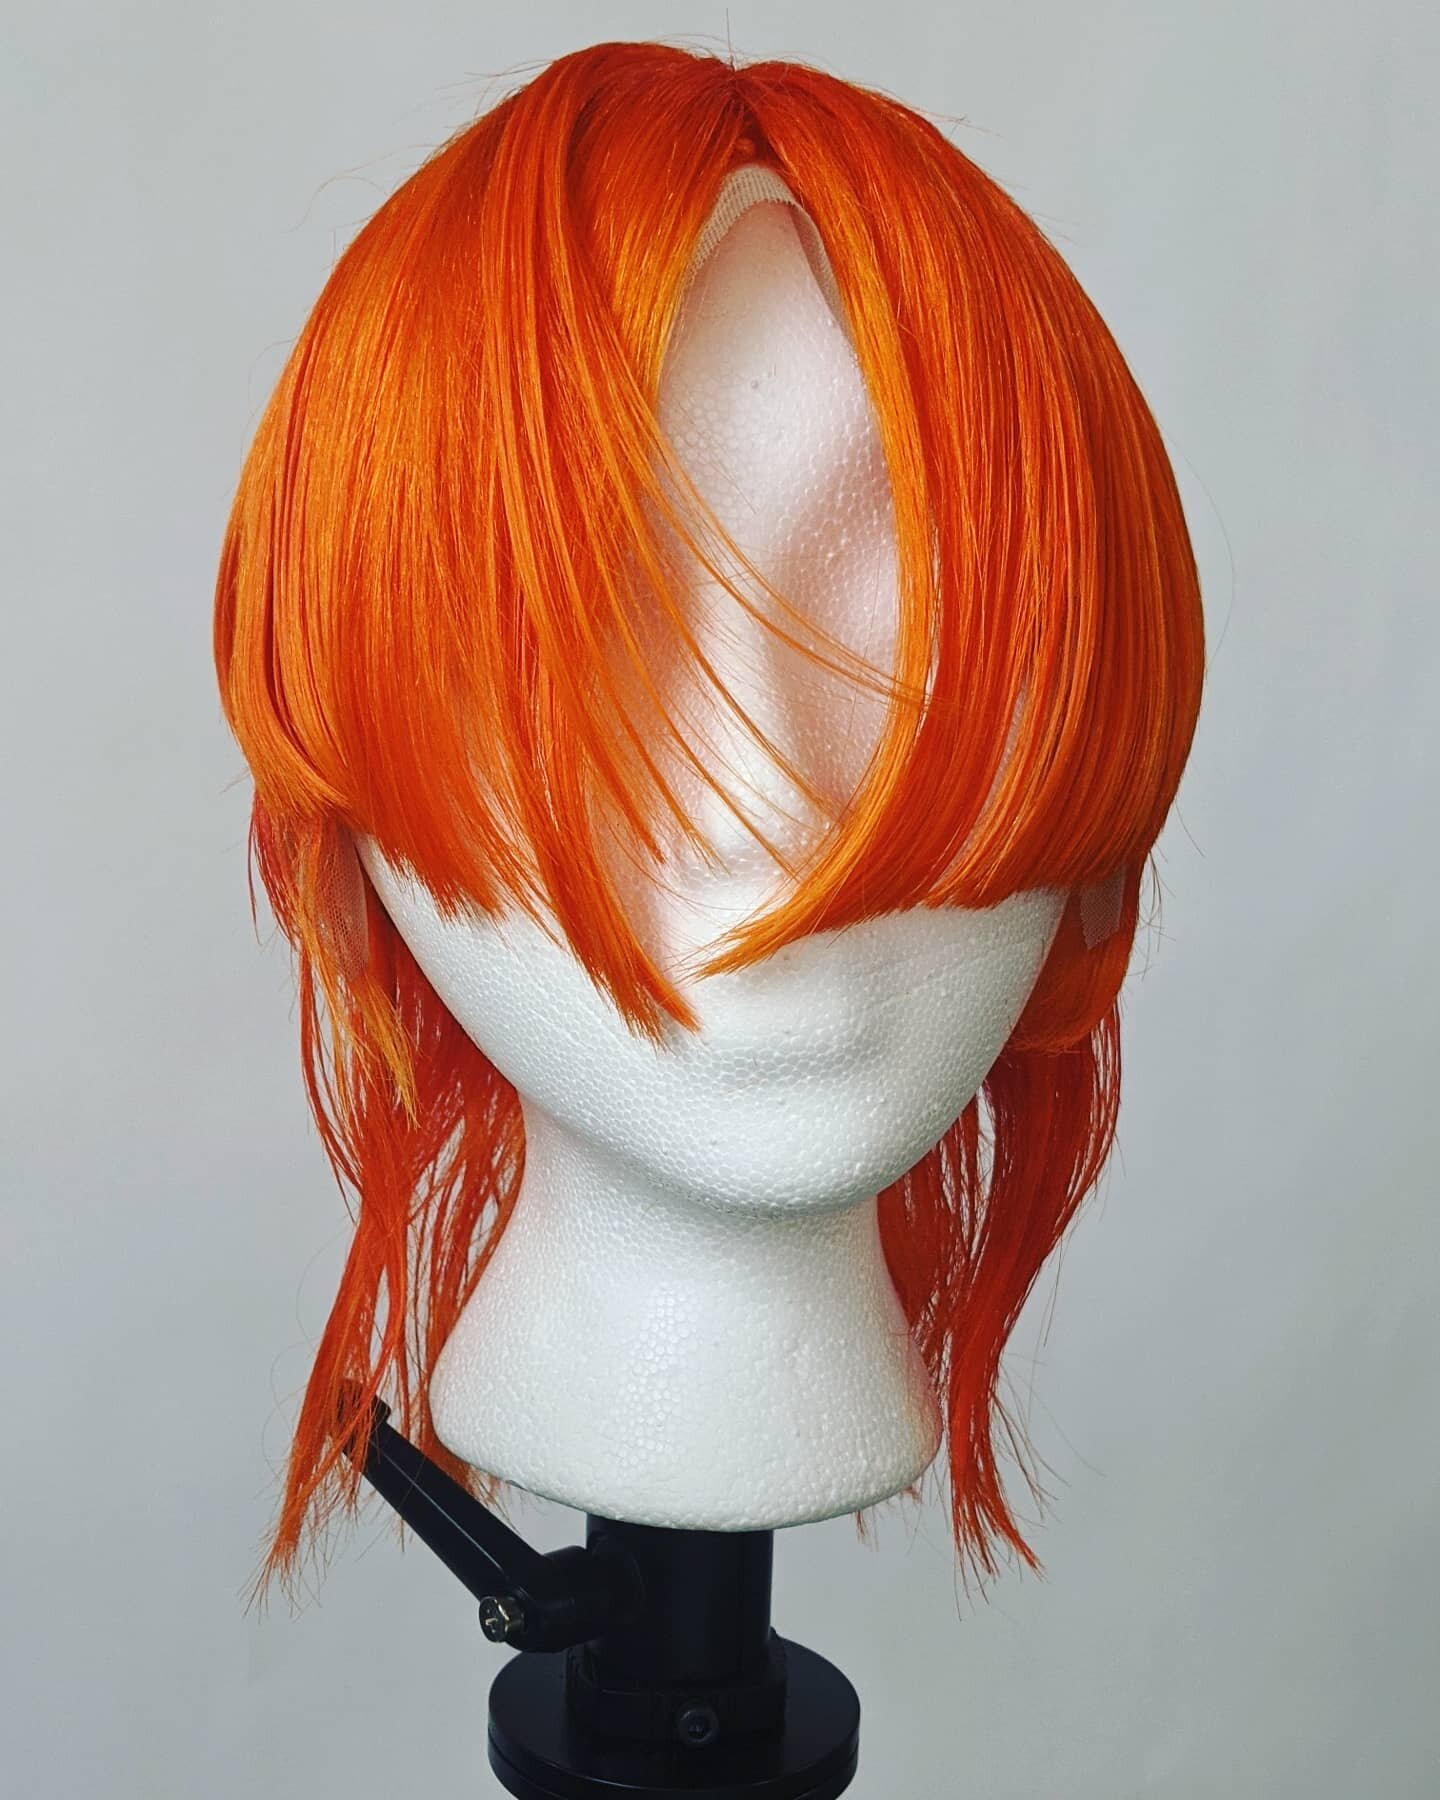 Wigs and things
#wigs
#electricorange